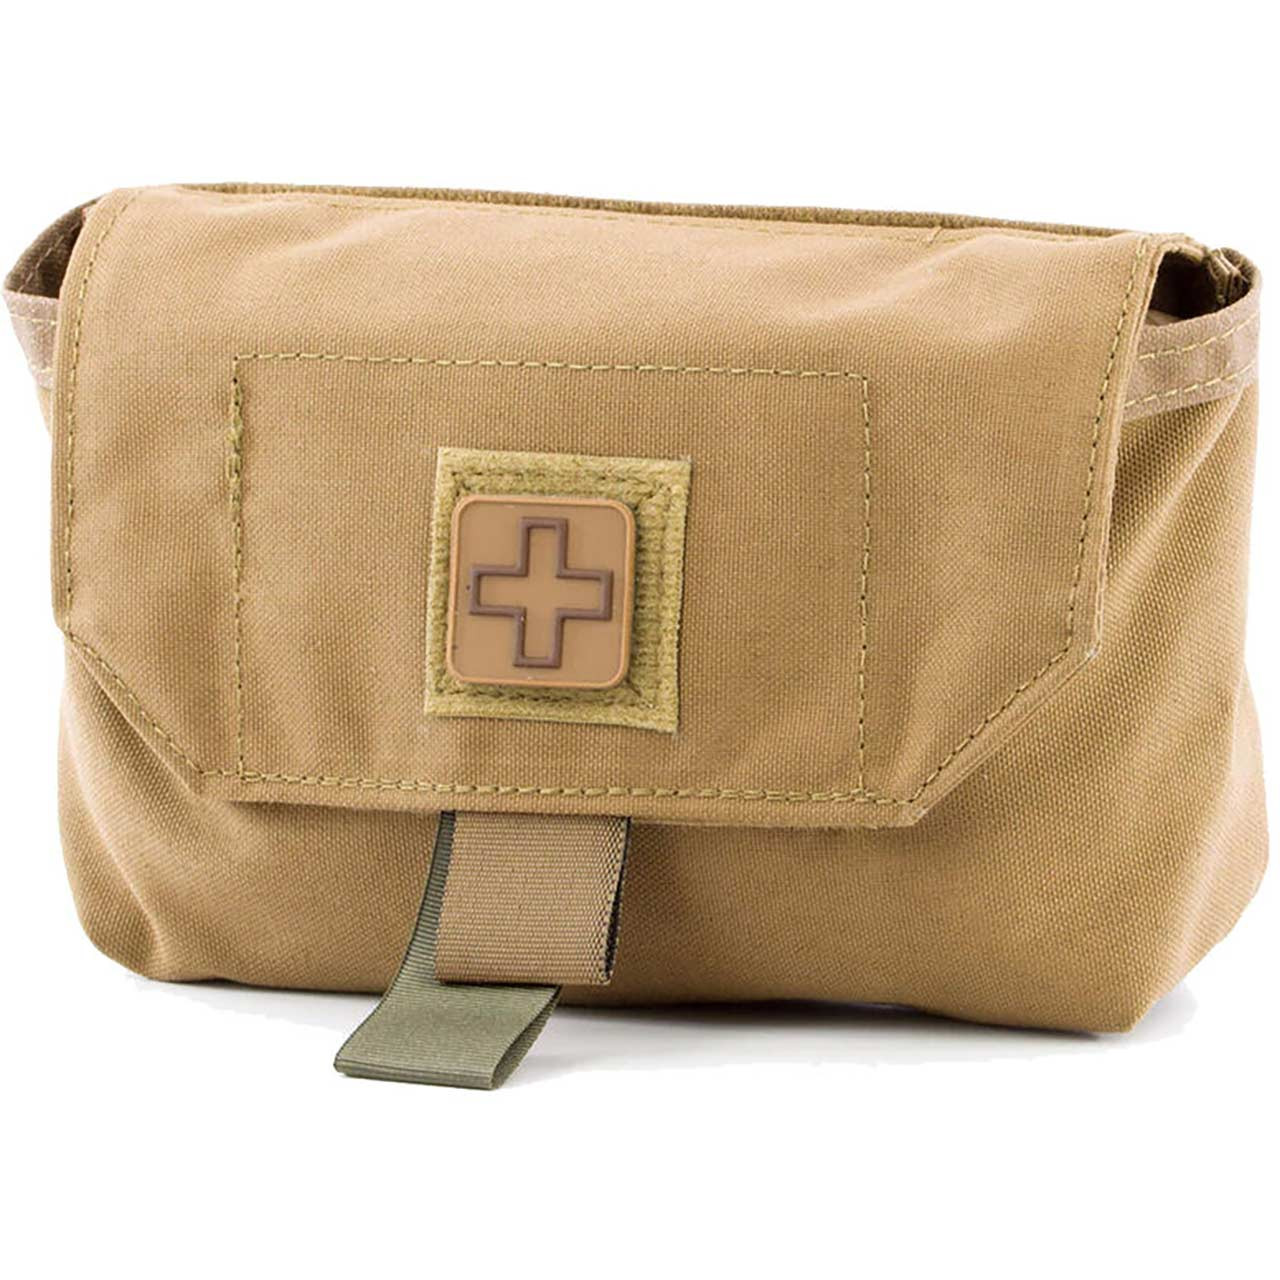 Eleven 10 Zippered Med Pouch